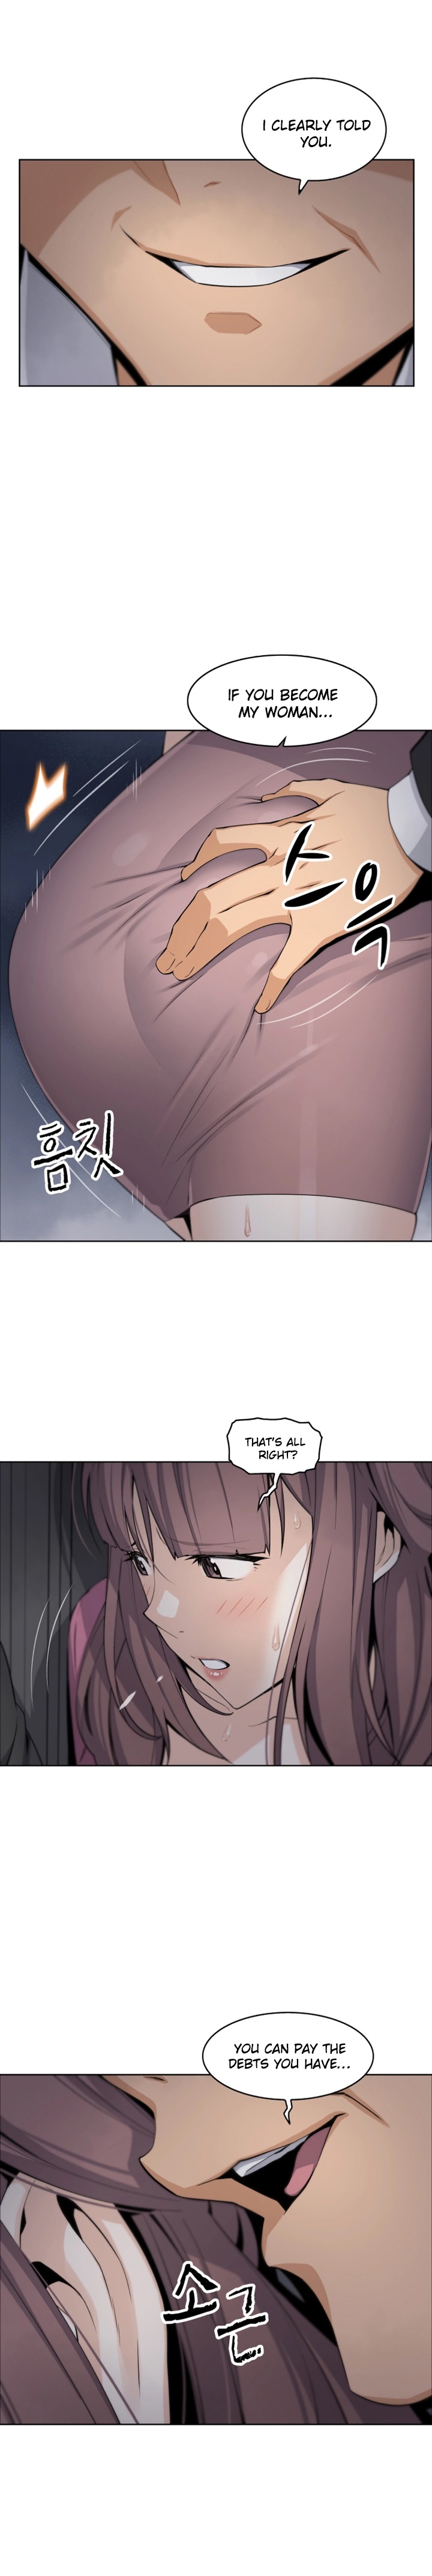 Housekeeper Manhwa - Chapter 13 Page 4